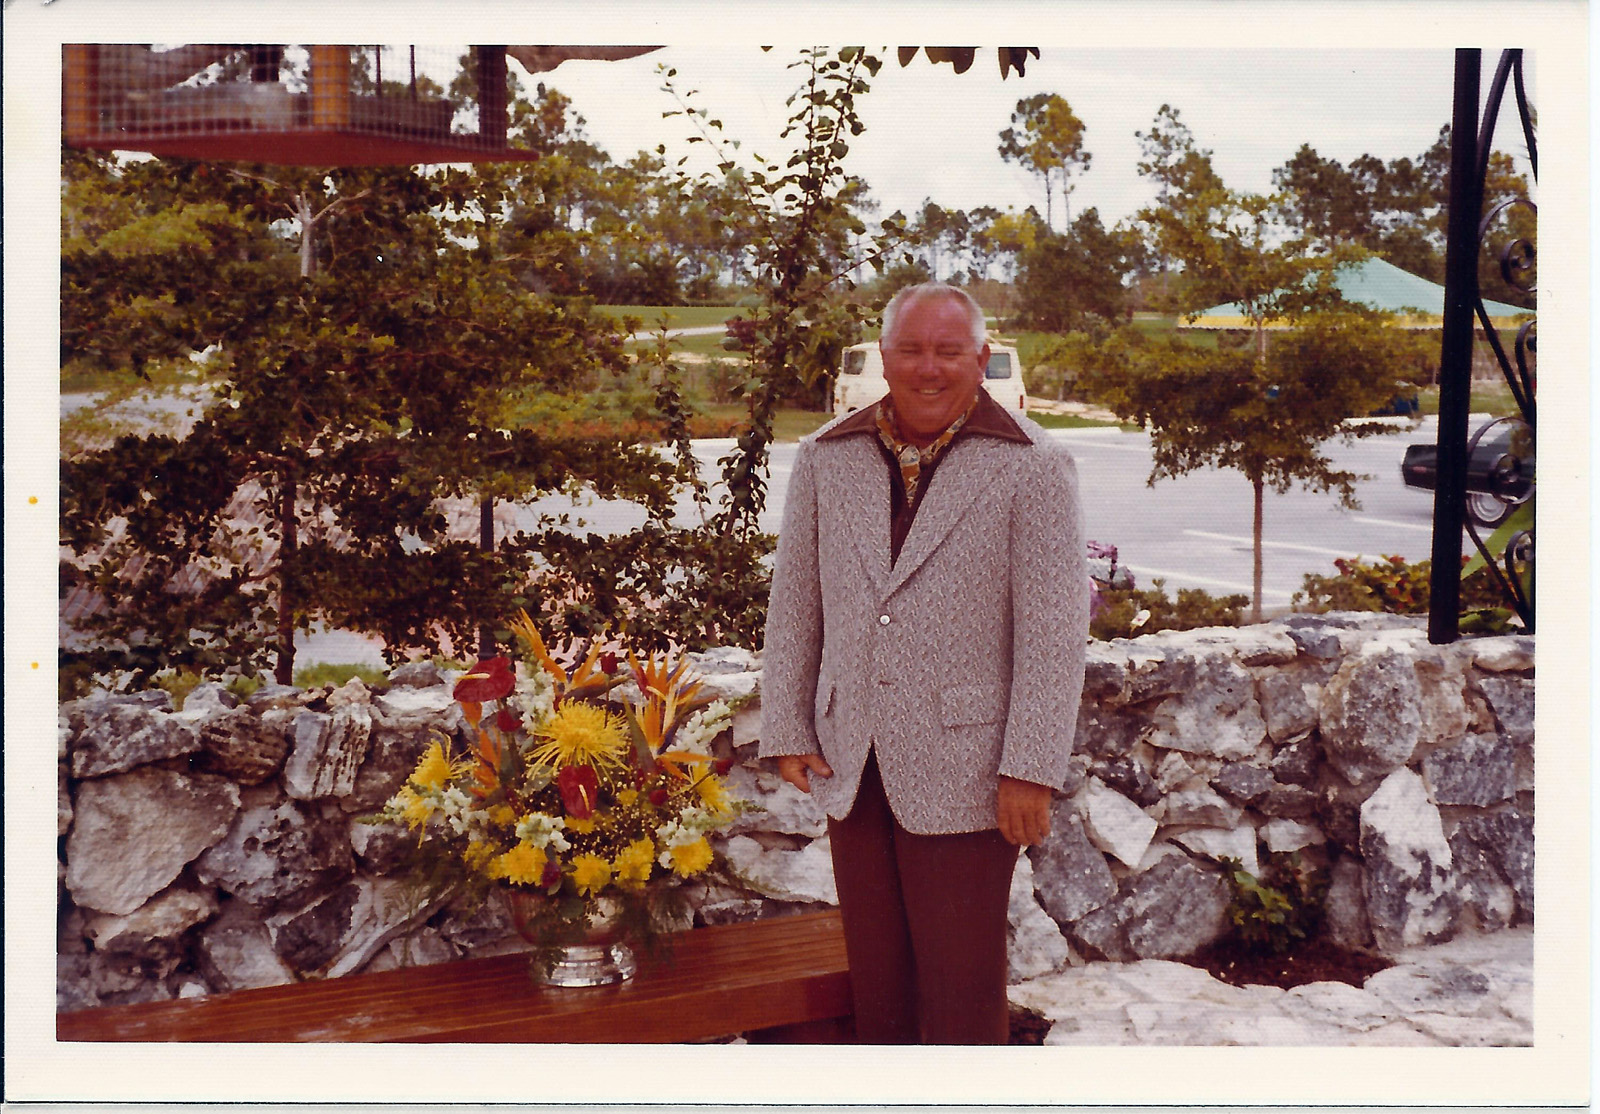 Horace Gay at the dedication of the Garden of the Groves